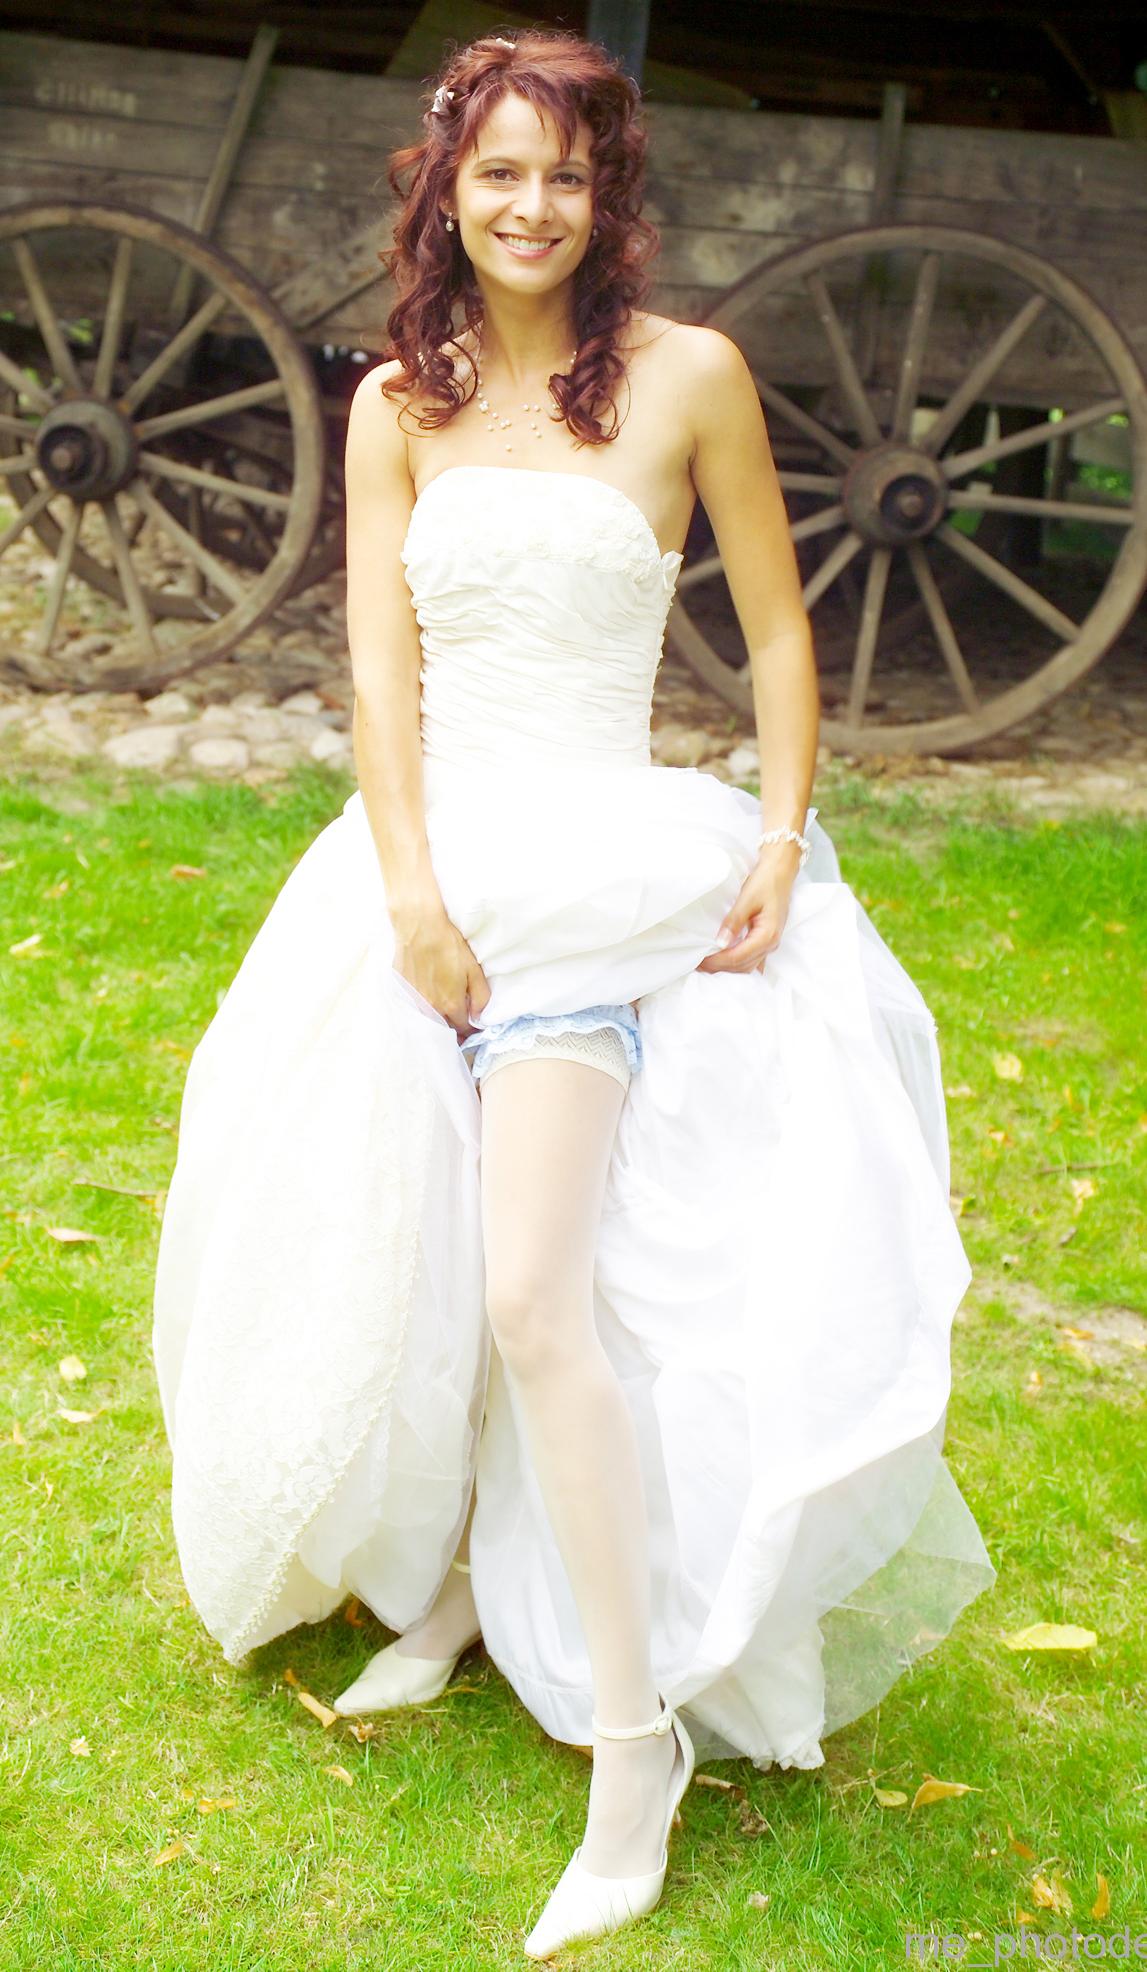 Young Redhead Bride wearing Sandal High Heels, White Opaque Stockings and White Long Dress